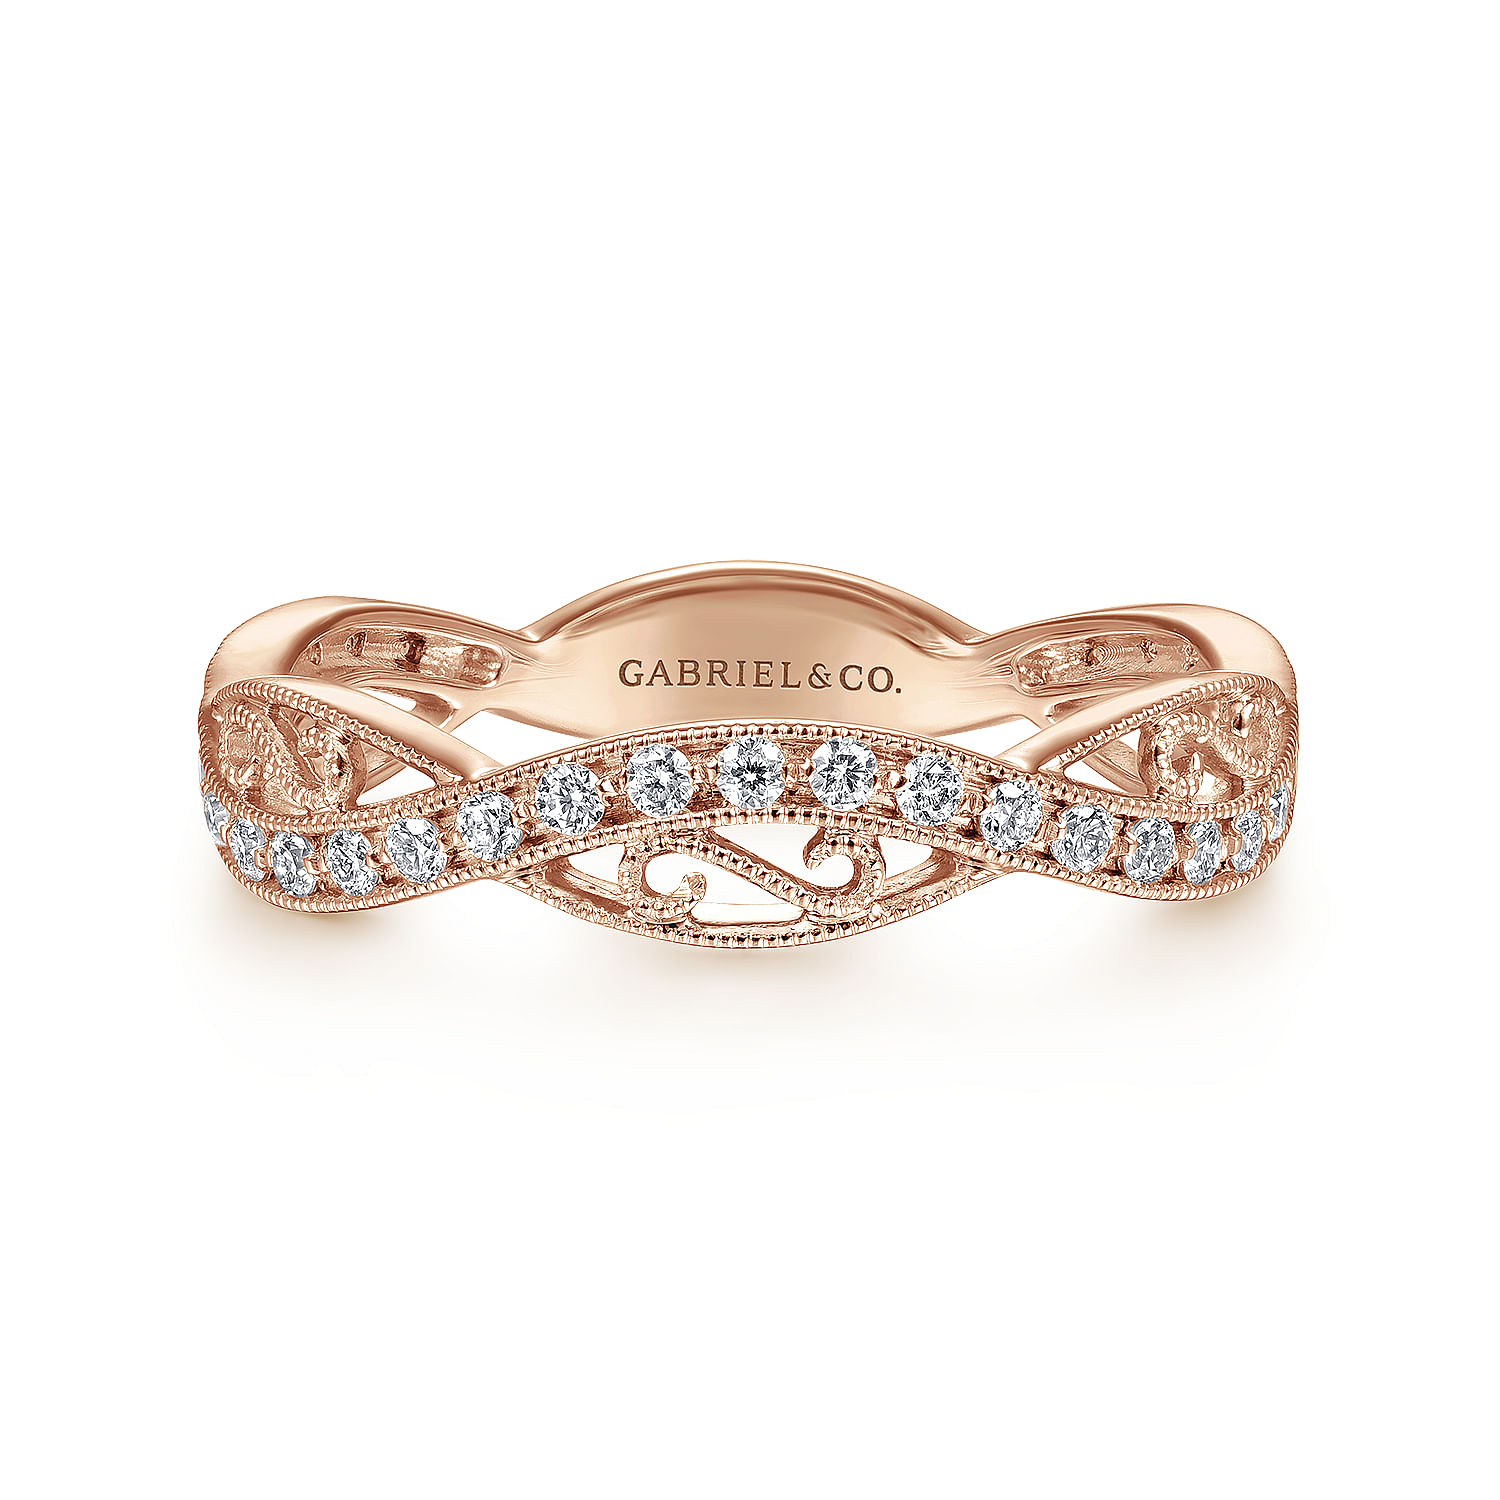 14K Rose Gold Twisted Diamond Ring with Scrollwork Accent